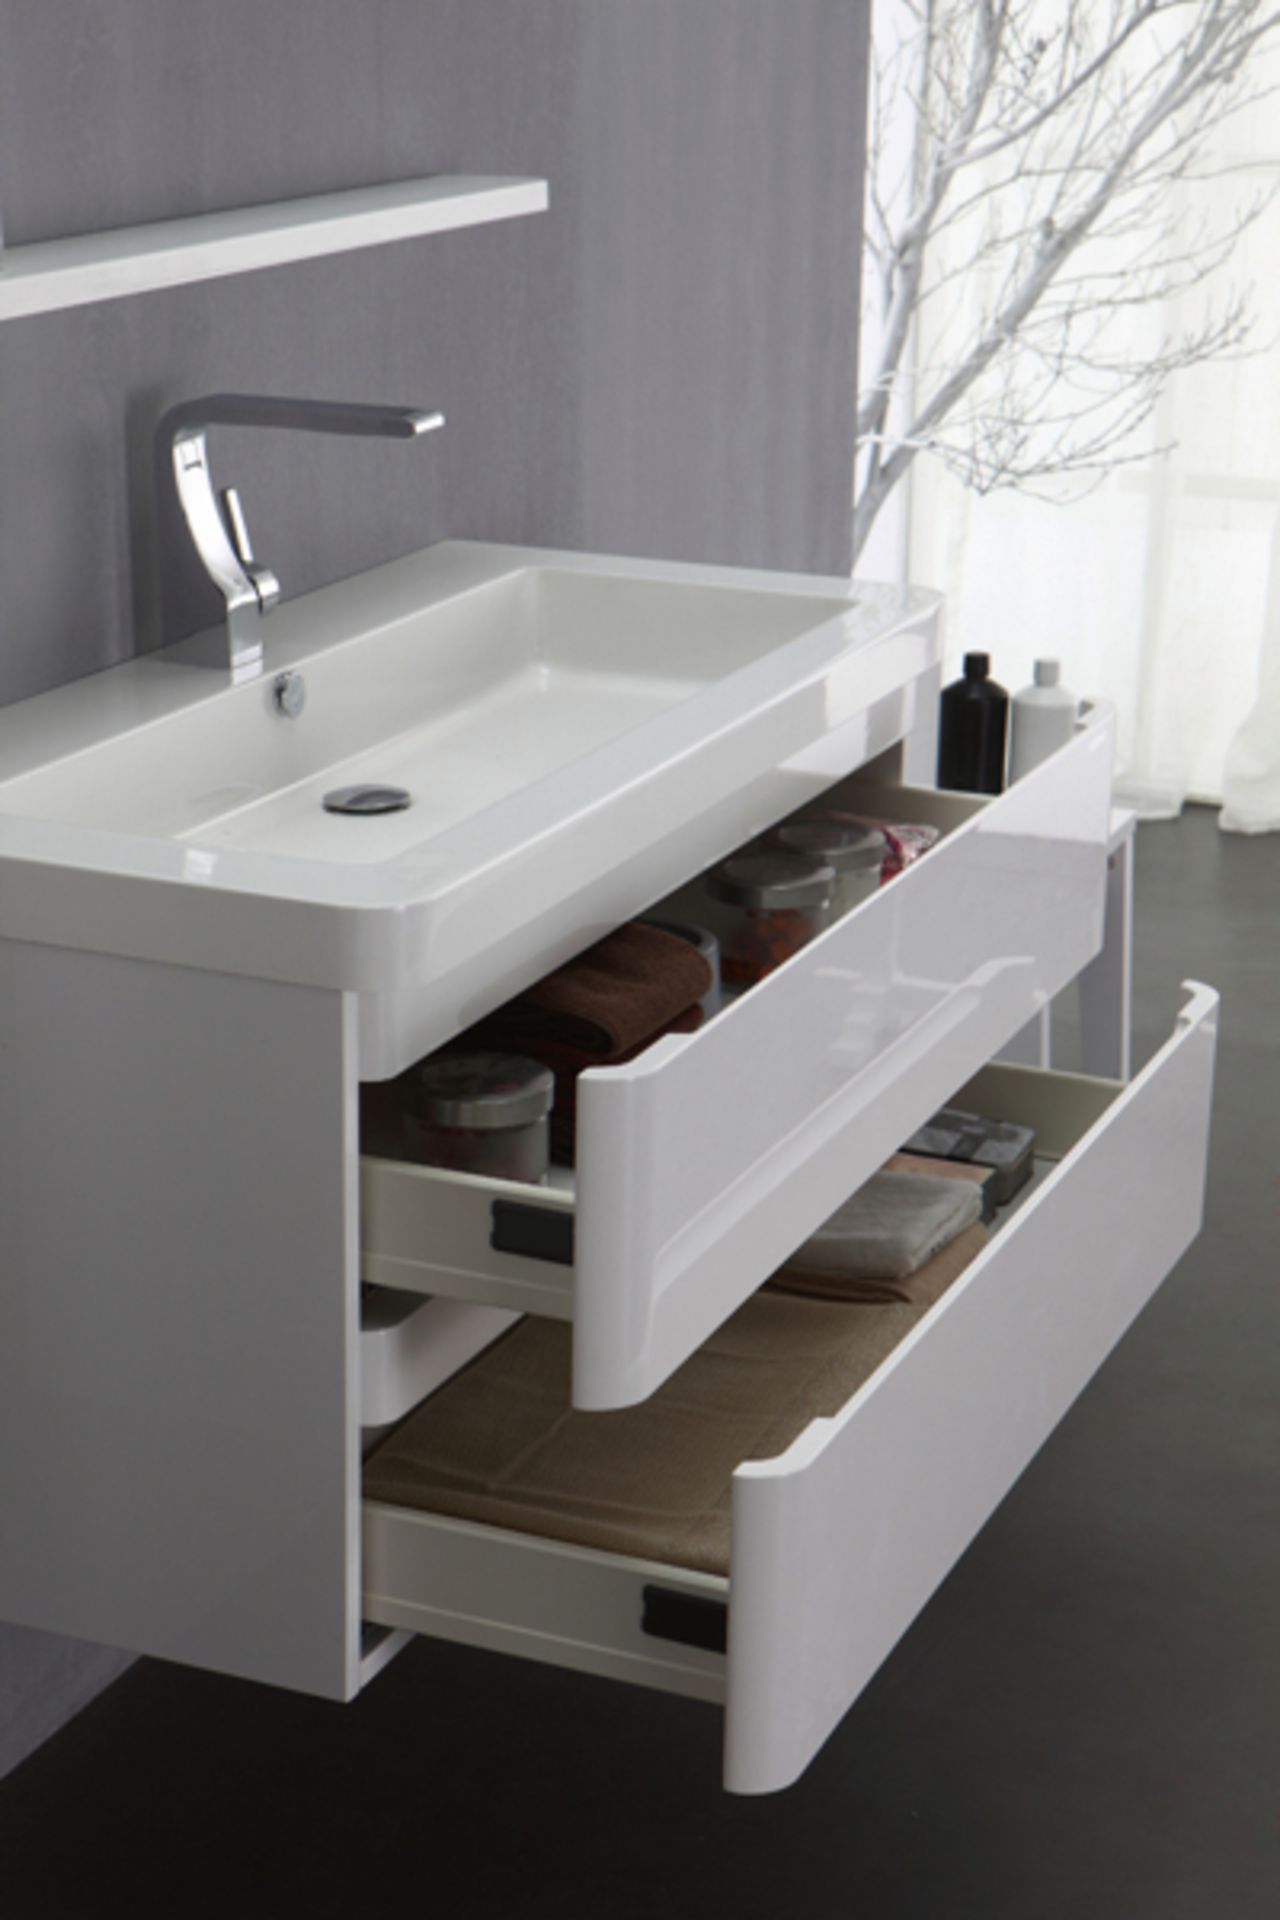 1 x MarbleTECH Urban Basin and Base Unit 60 - A-Grade - Ref:ABS21-060 & AWS31-060 - CL170 - - Image 2 of 3